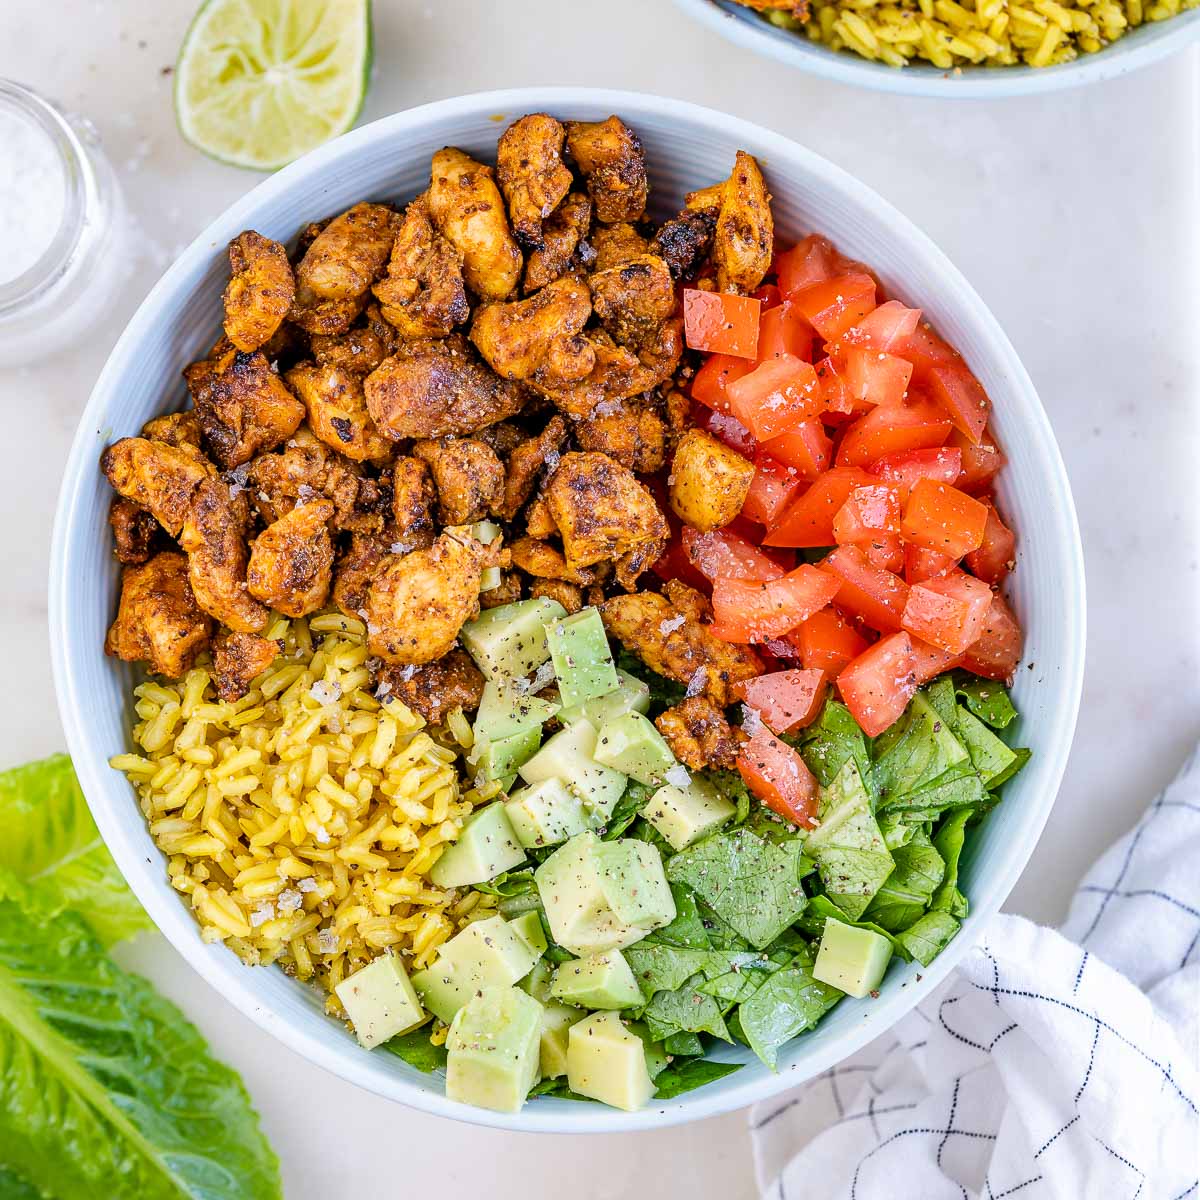 Six Spice Chicken Bowls + Turmeric Rice | Clean Food Crush